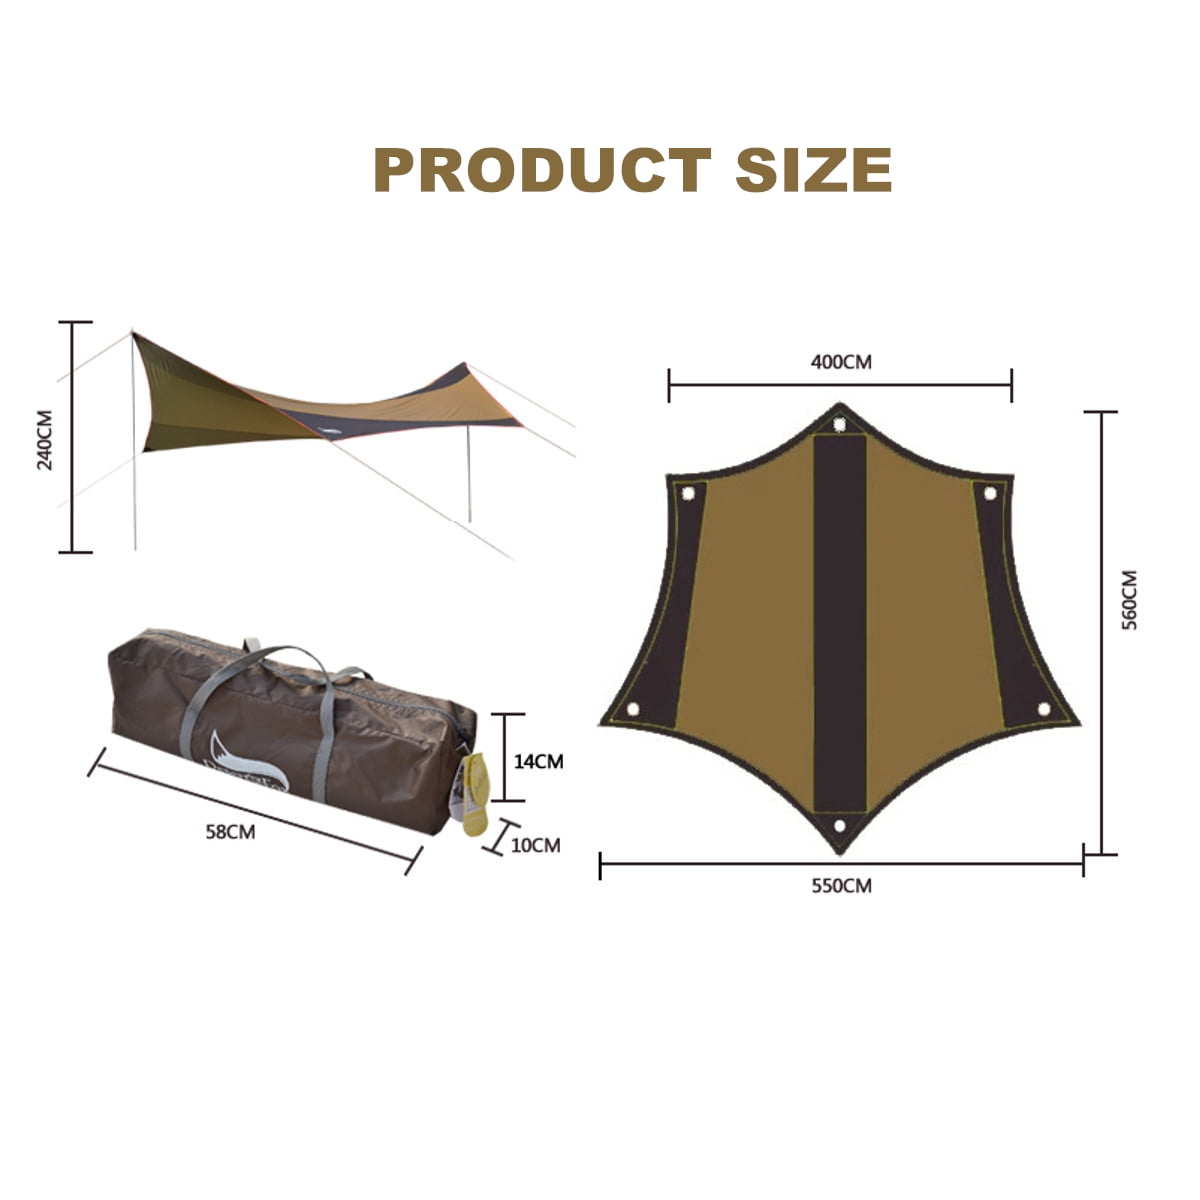 DESERT /& FOX Large Tent Tarp Outdoor Sun Shelter Attached Pole 18x18.5 ft Camping Canopy 5-8 Person Waterproof /& UV-Protection Beach Sun Shade for Camping Hiking Fishing Picnic